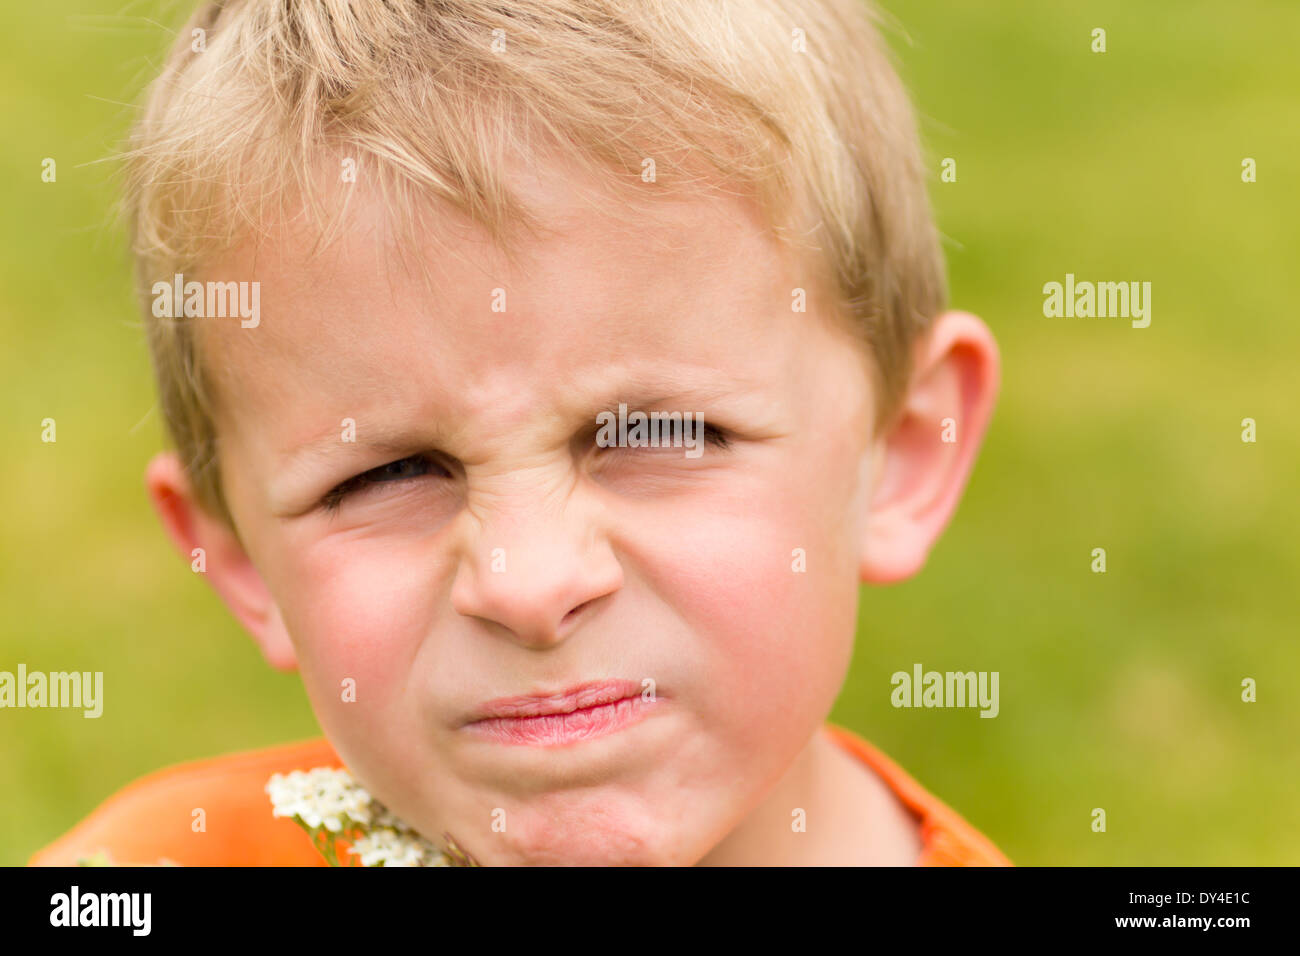 Young boy with a displeased look on his face Stock Photo